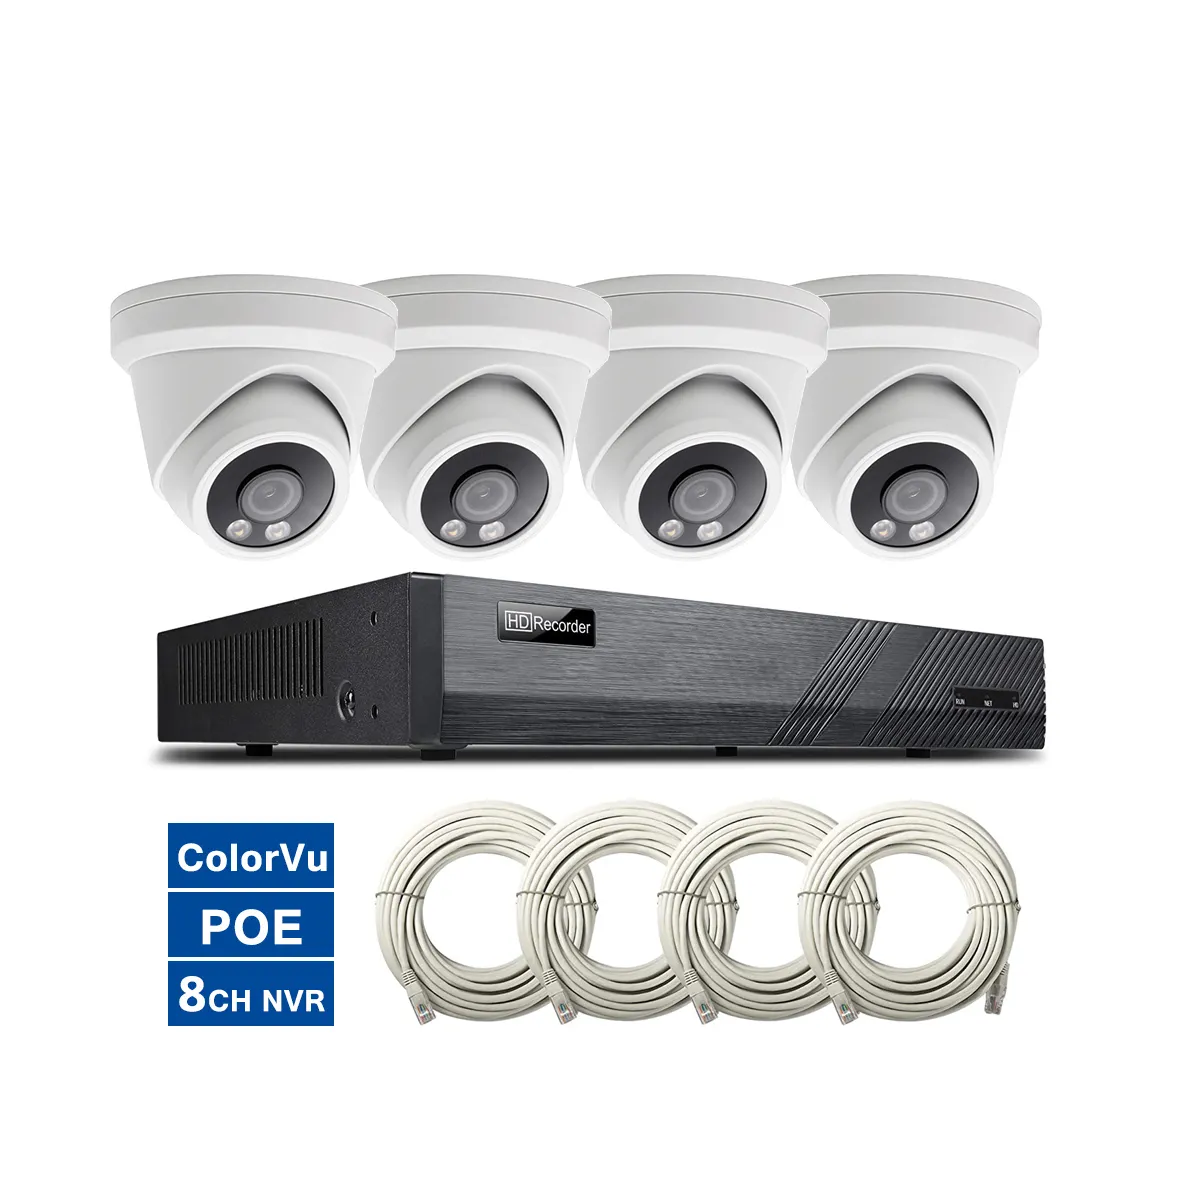 8 ch hd nvr poe kit cctv 4 full color 5mp colorvu dome ip cameras poe system outdoor security h.265 Record Video Audio 24/7